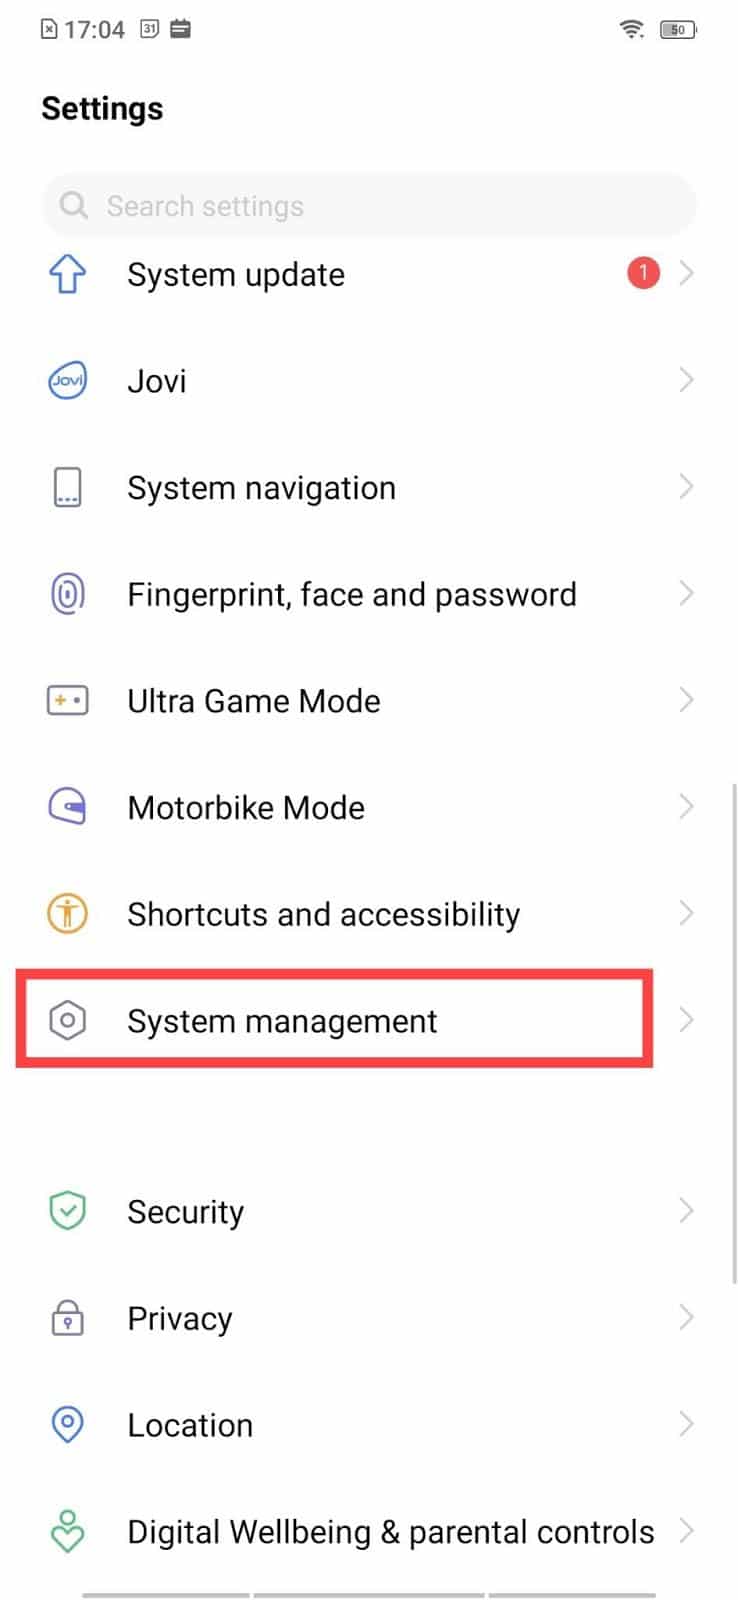 Go to System or System Management | How to Find your Own Phone Number on Android